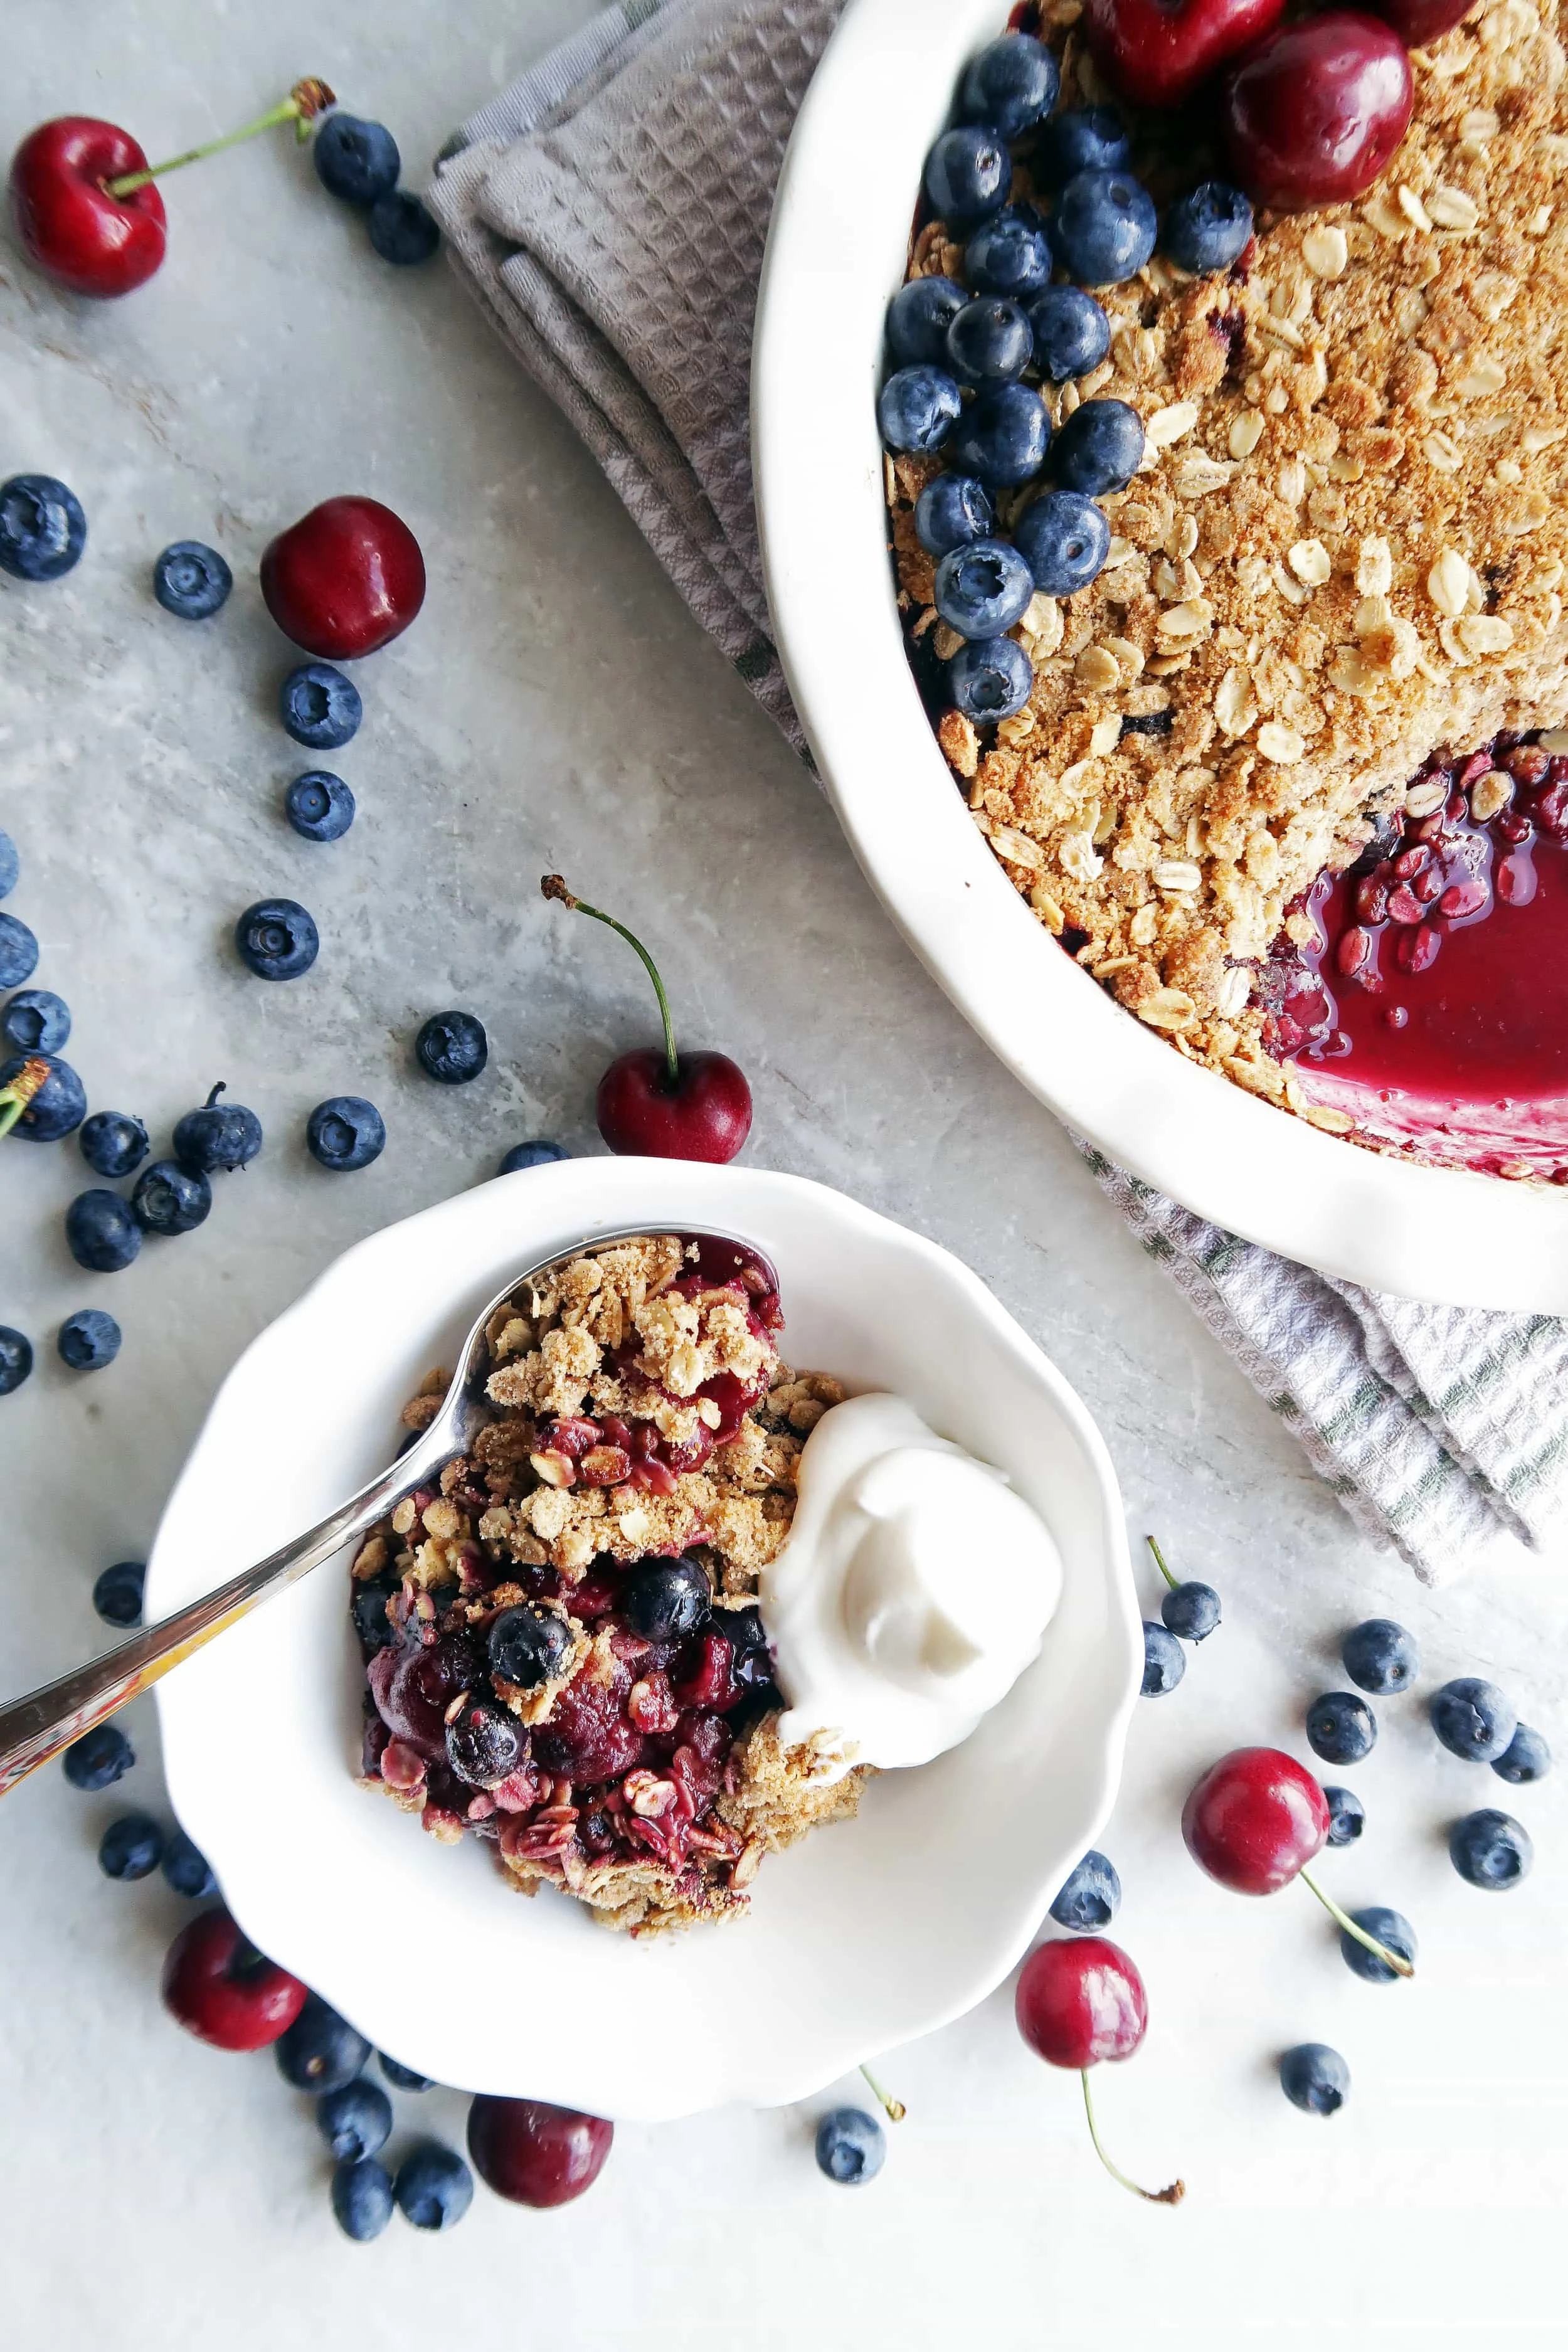 Cherry blueberry oat crisp with whipped cream in a white bowl with a spoon and oat crisp in a pie dish.